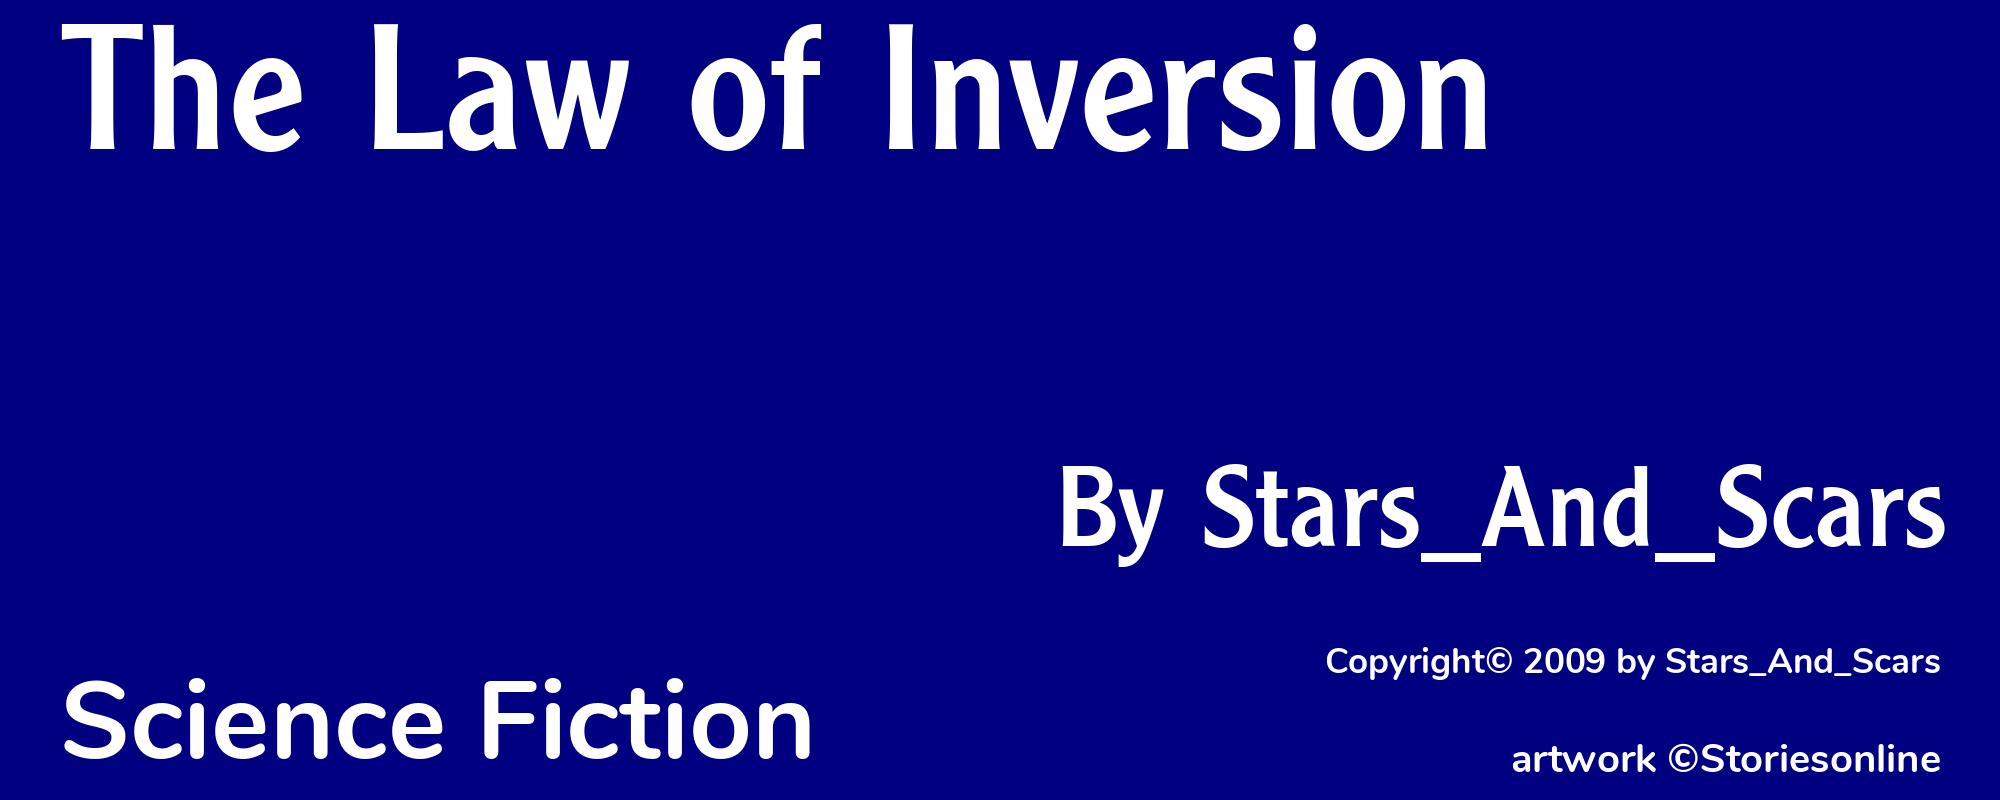 The Law of Inversion - Cover